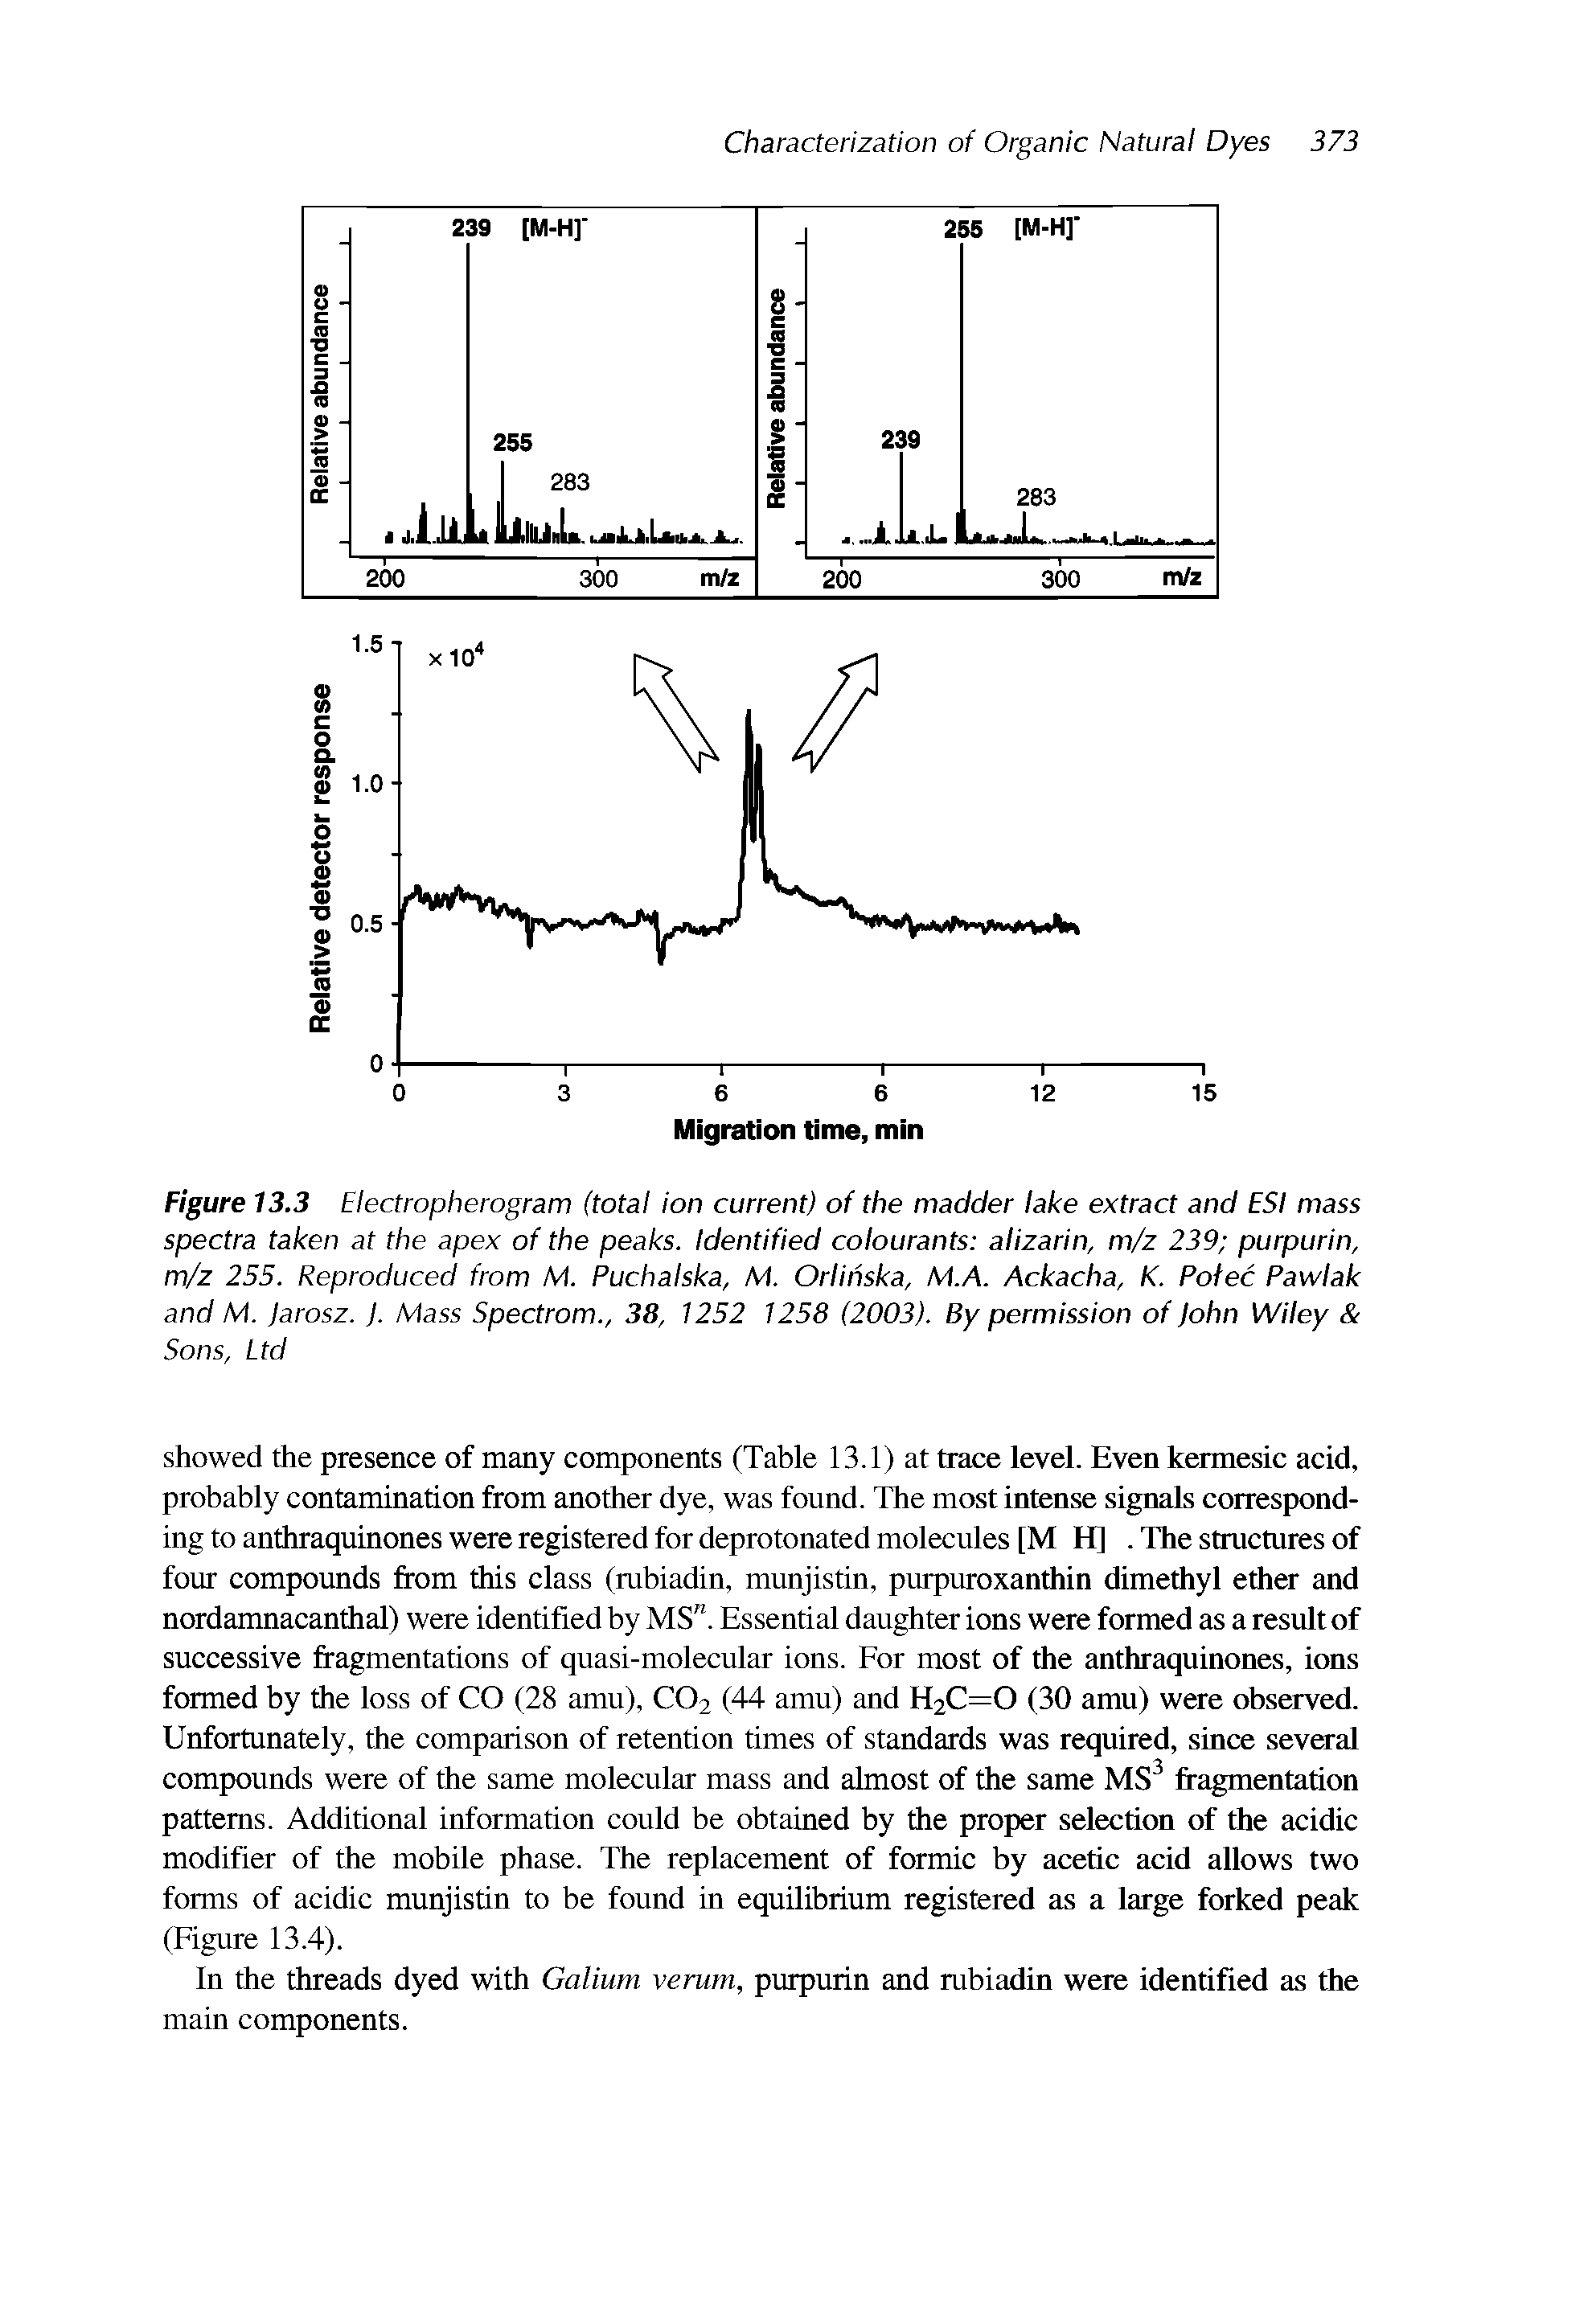 Figure 13.3 Electropherogram (total ion current) of the madder lake extract and ESI mass spectra taken at the apex of the peaks. Identified colourants alizarin, m/z 239 purpurin, m/z 255. Reproduced from M. Puchalska, M. Orlihska, M.A. Ackacha, K. Pofec Pawlak and M. Jarosz. J. Mass Spectrom., 38, 1252 1258 (2003). By permission of John Wiley ...